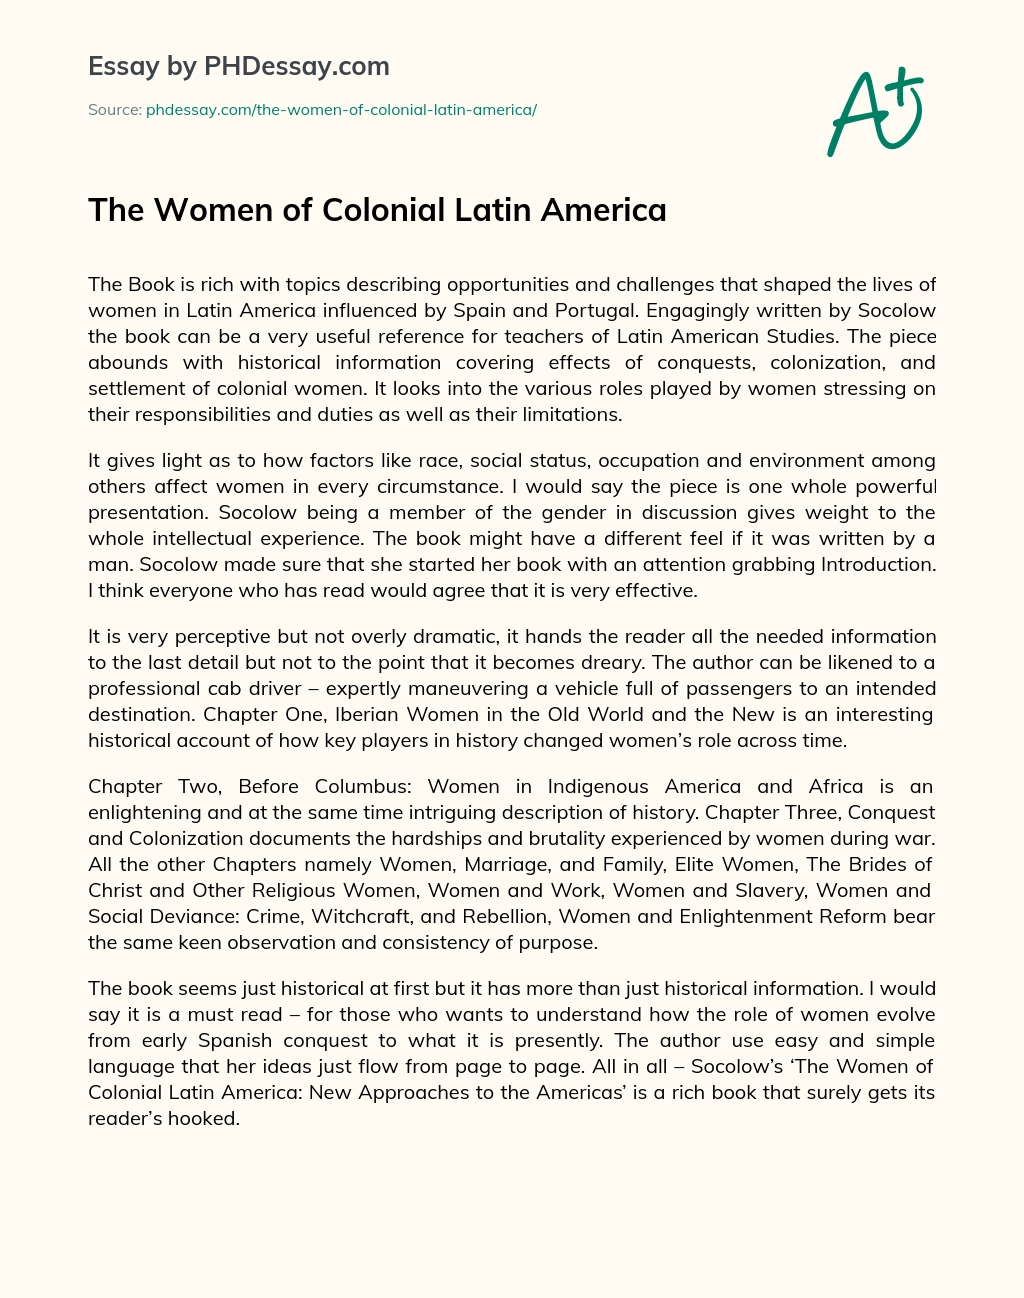 The Women of Colonial Latin America essay